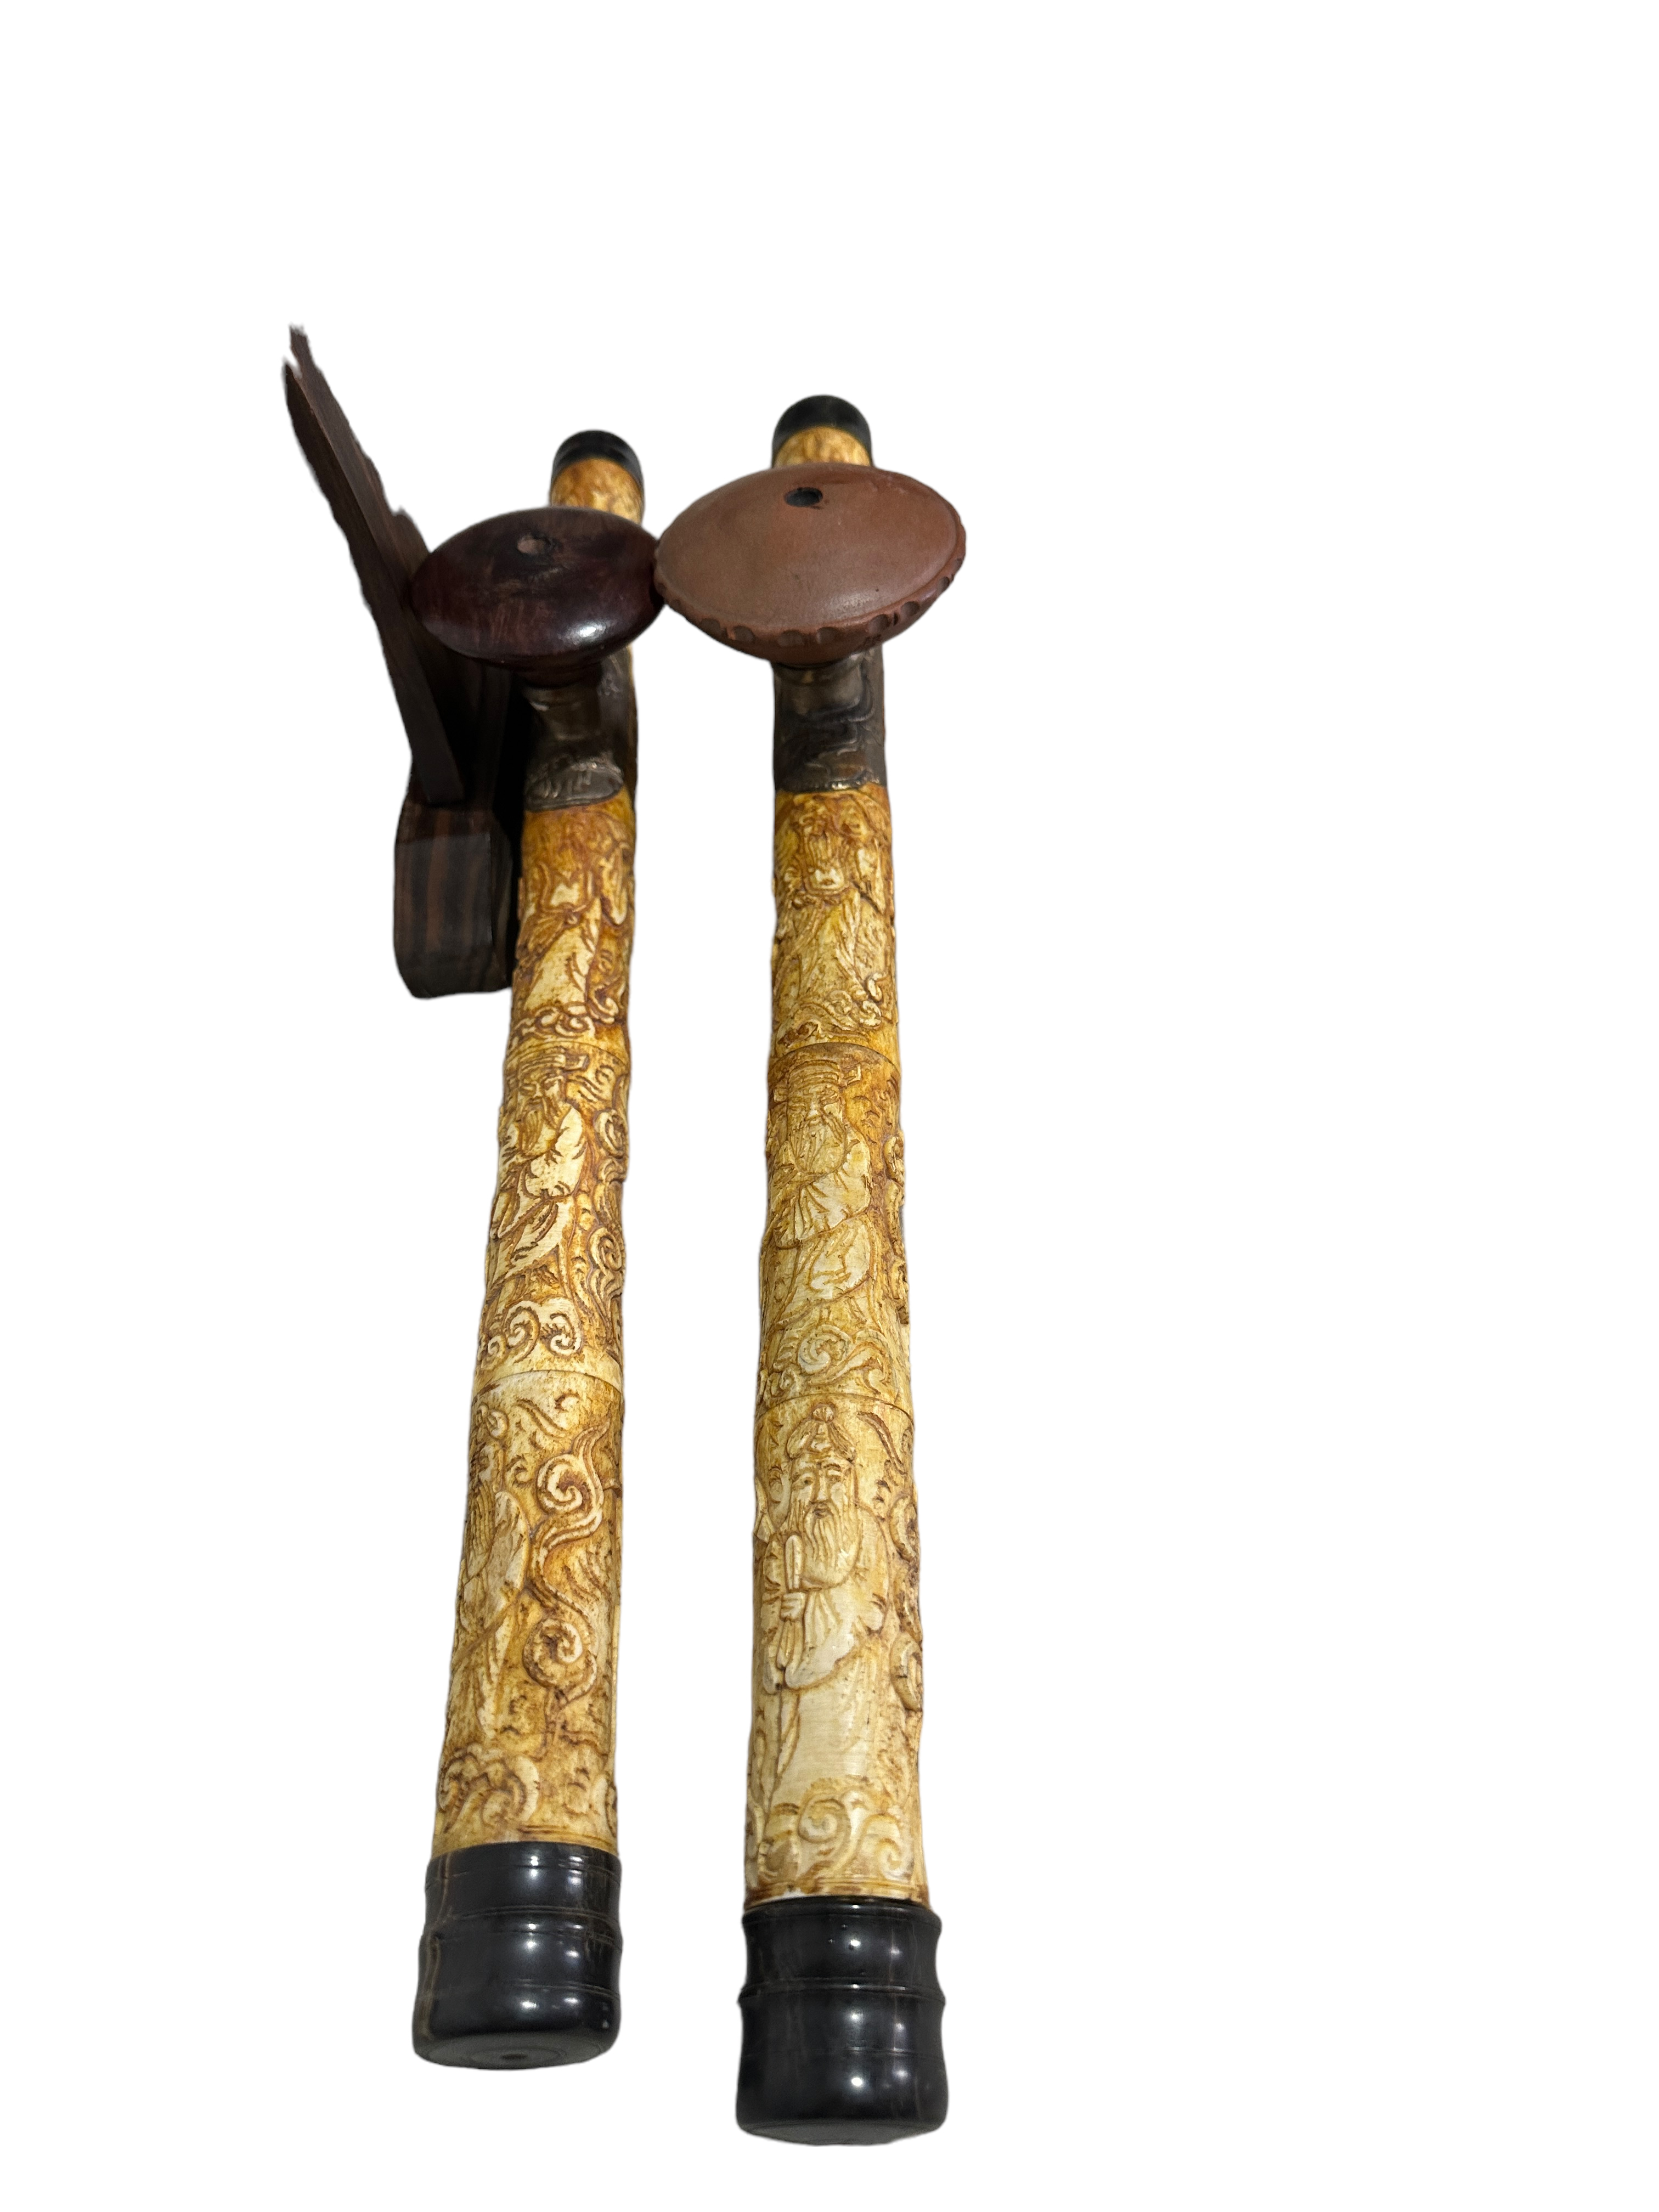 Lot of Opium Pipe with Jade Fittings on Stand-Bone and Wood Opium Pipes+2 Resin examples - Image 9 of 11